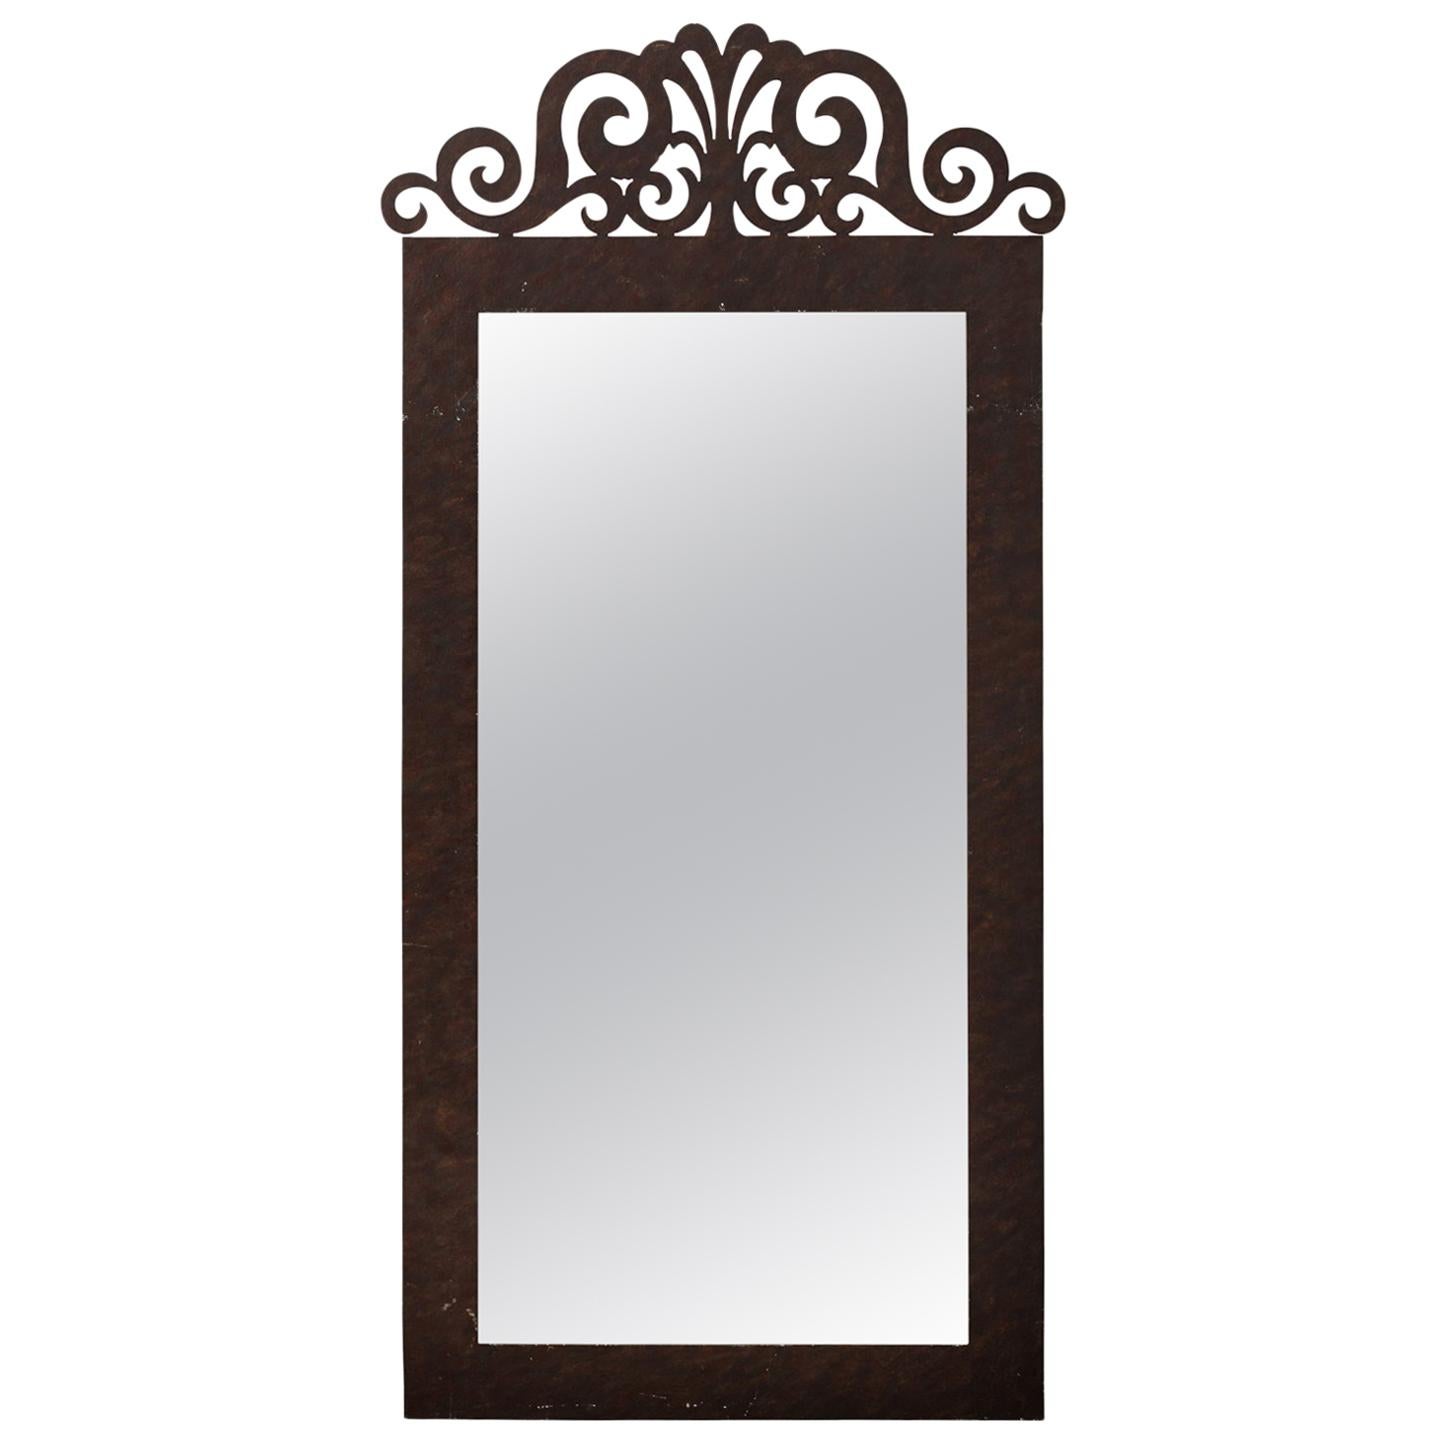 Iron Scrolled Crest Mirror For Sale